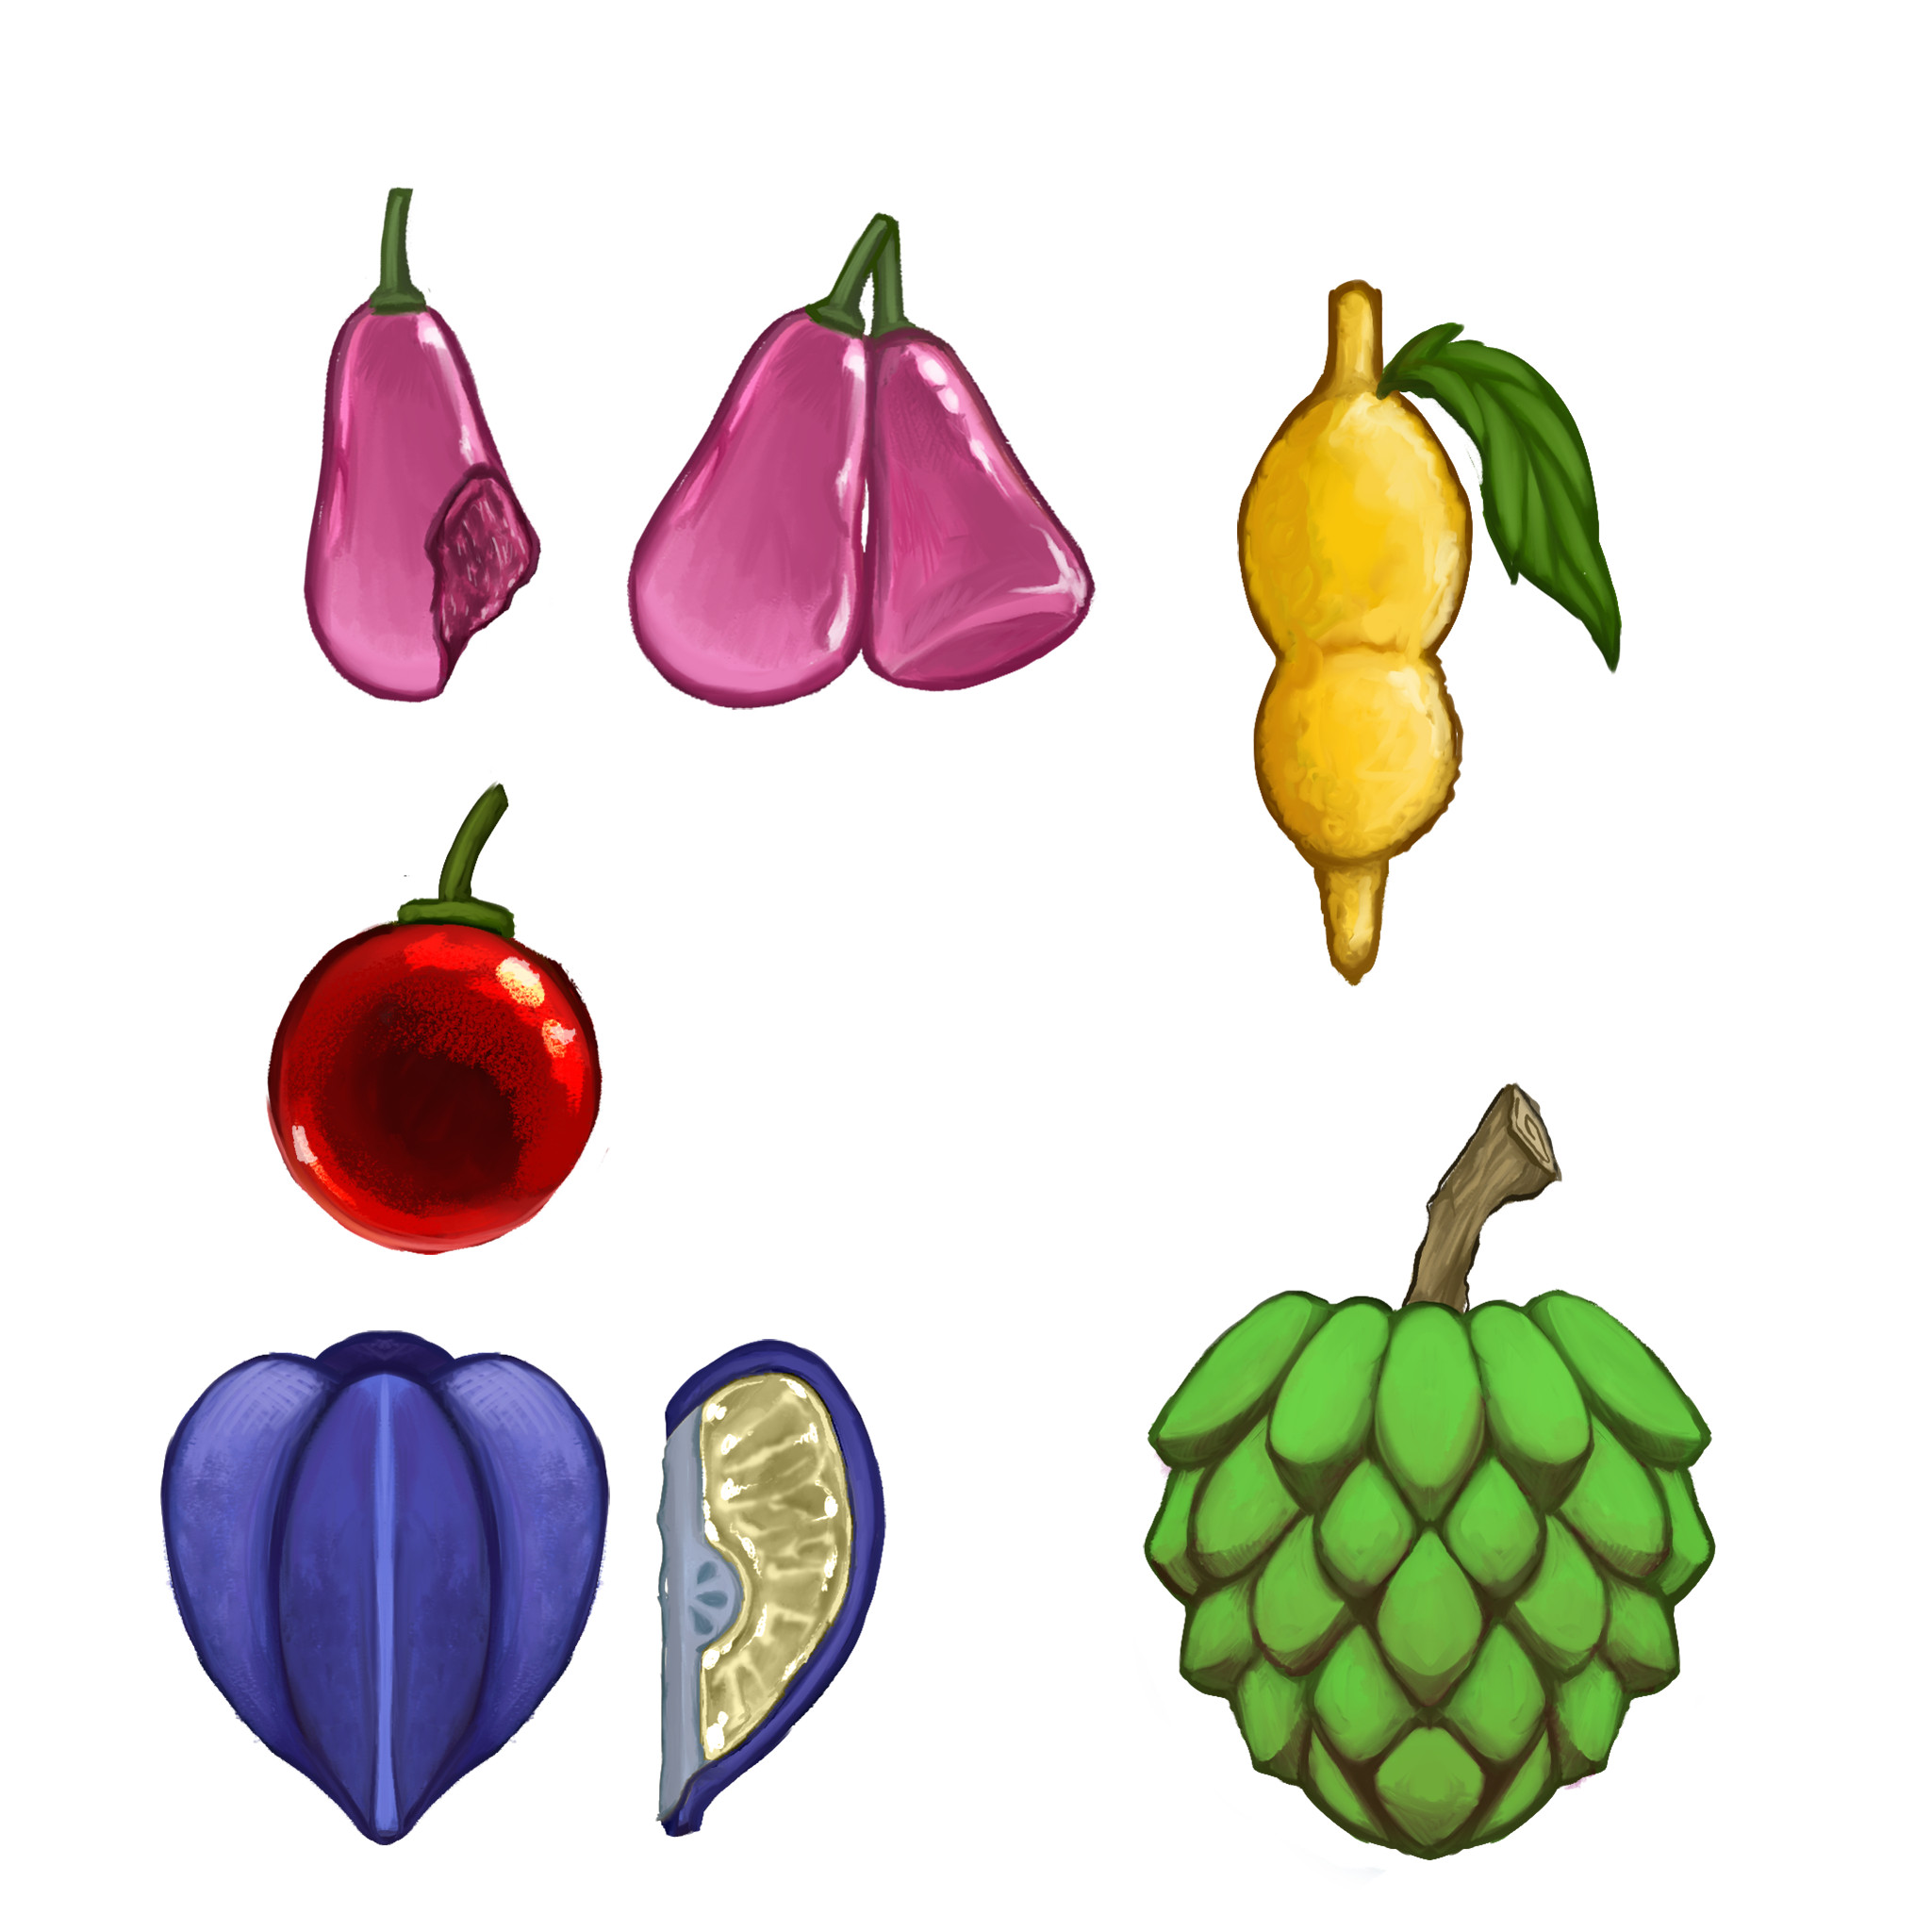 Concept art of some of the various fruits and berries you can see around the scene. I wanted these berries to look as if they belonged to a fantasy world without appearing too unbelievable.